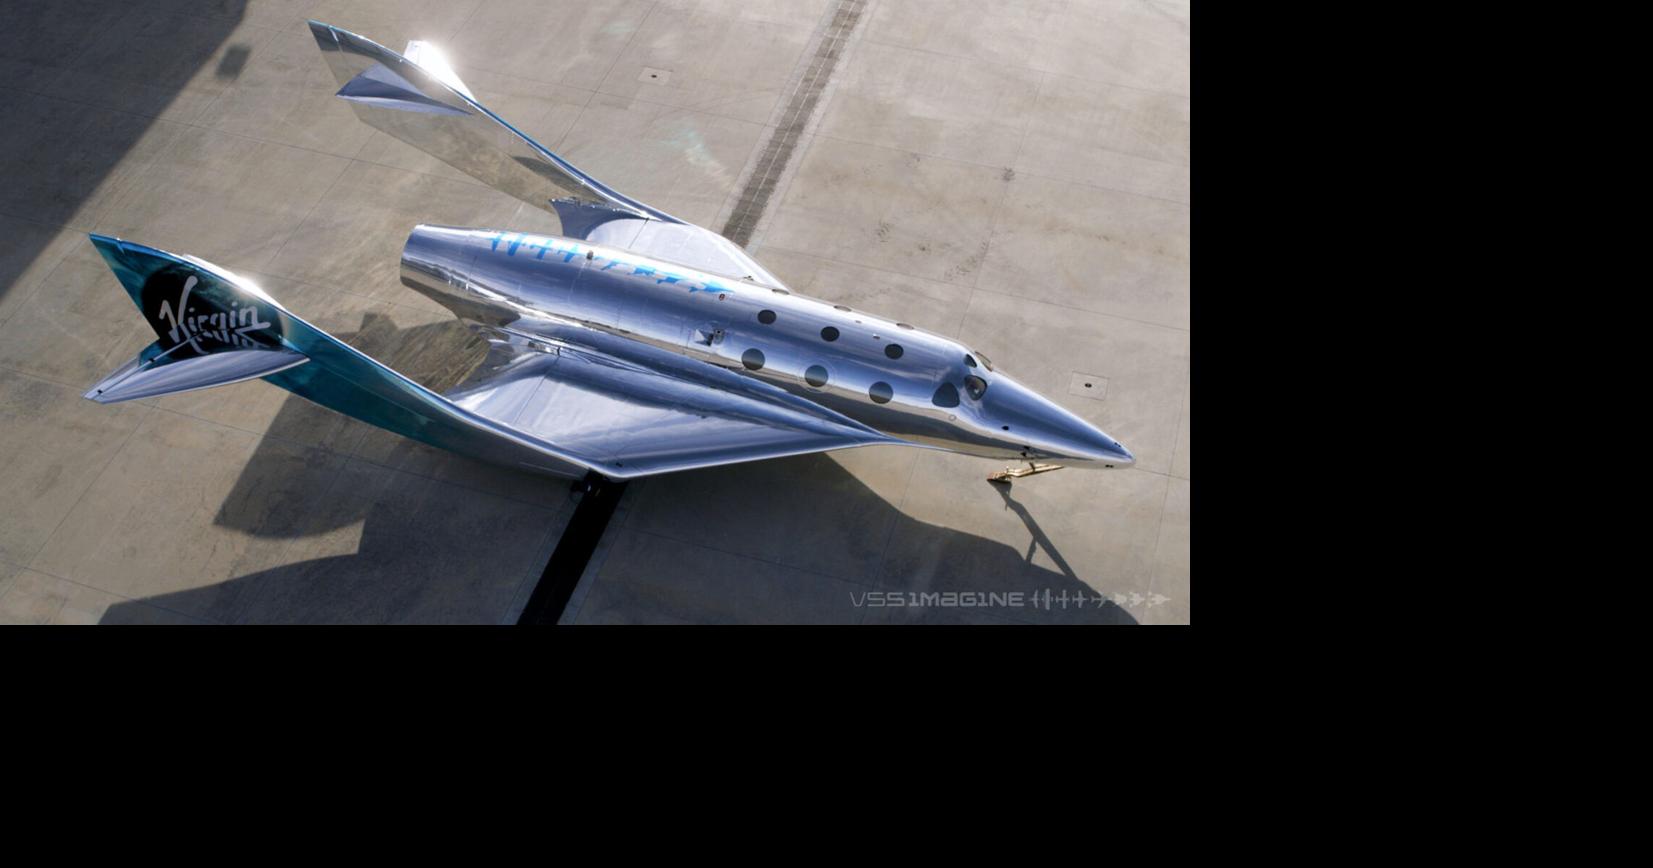 Virgin Galactic cuts 78 jobs in Mojave amid shift to higher-frequency flight